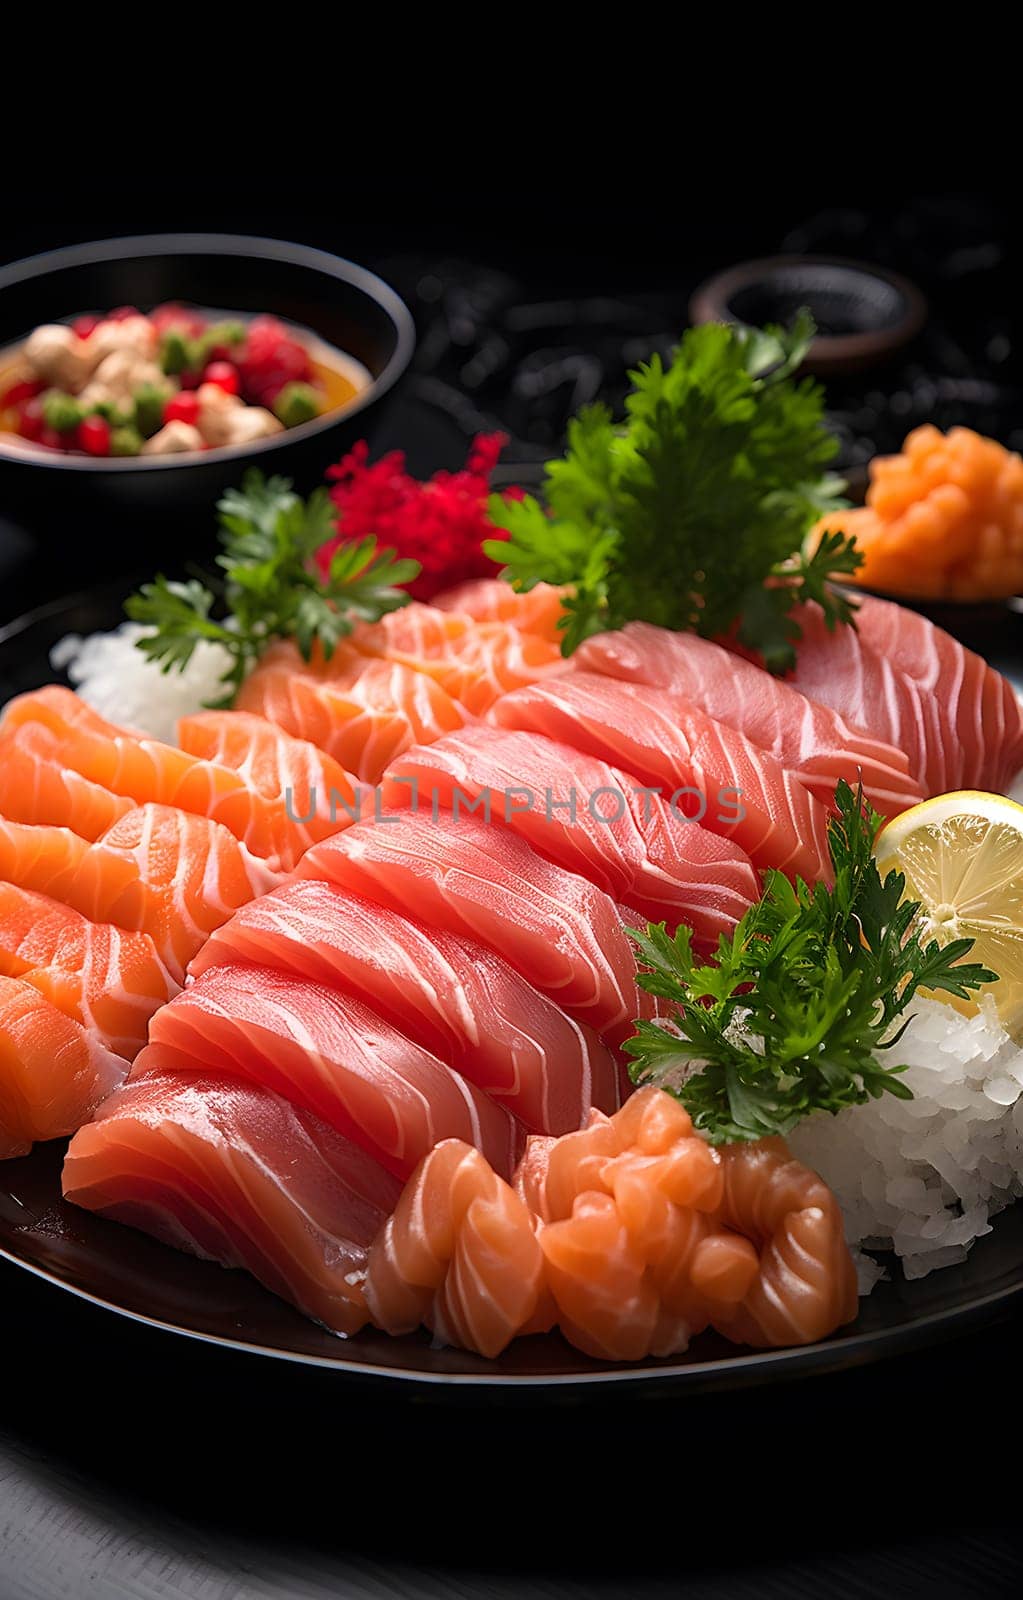 A plate of raw fish and rice - sashimi and sushi by chrisroll